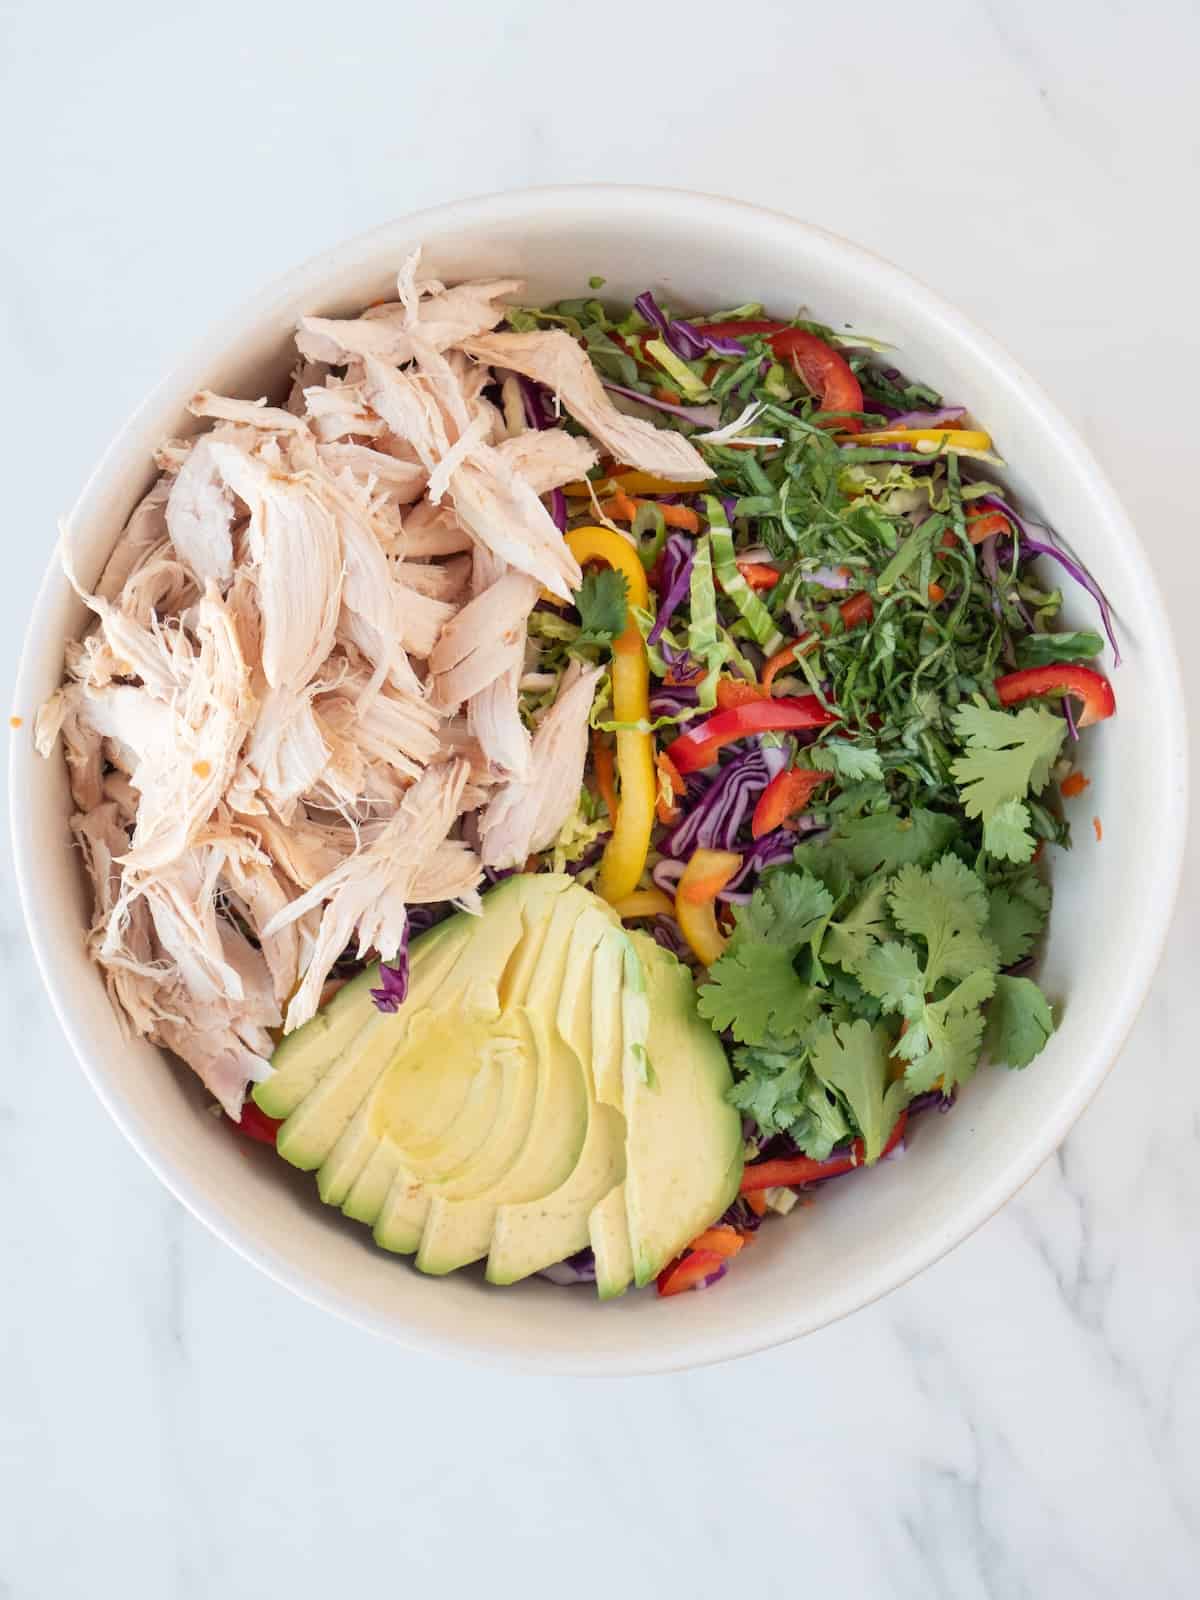 A bowl with thinly sliced veggies for the asian chicken slaw, topped with sliced avocado, shredded chicken, fresh cilantro and sliced basil leaves.